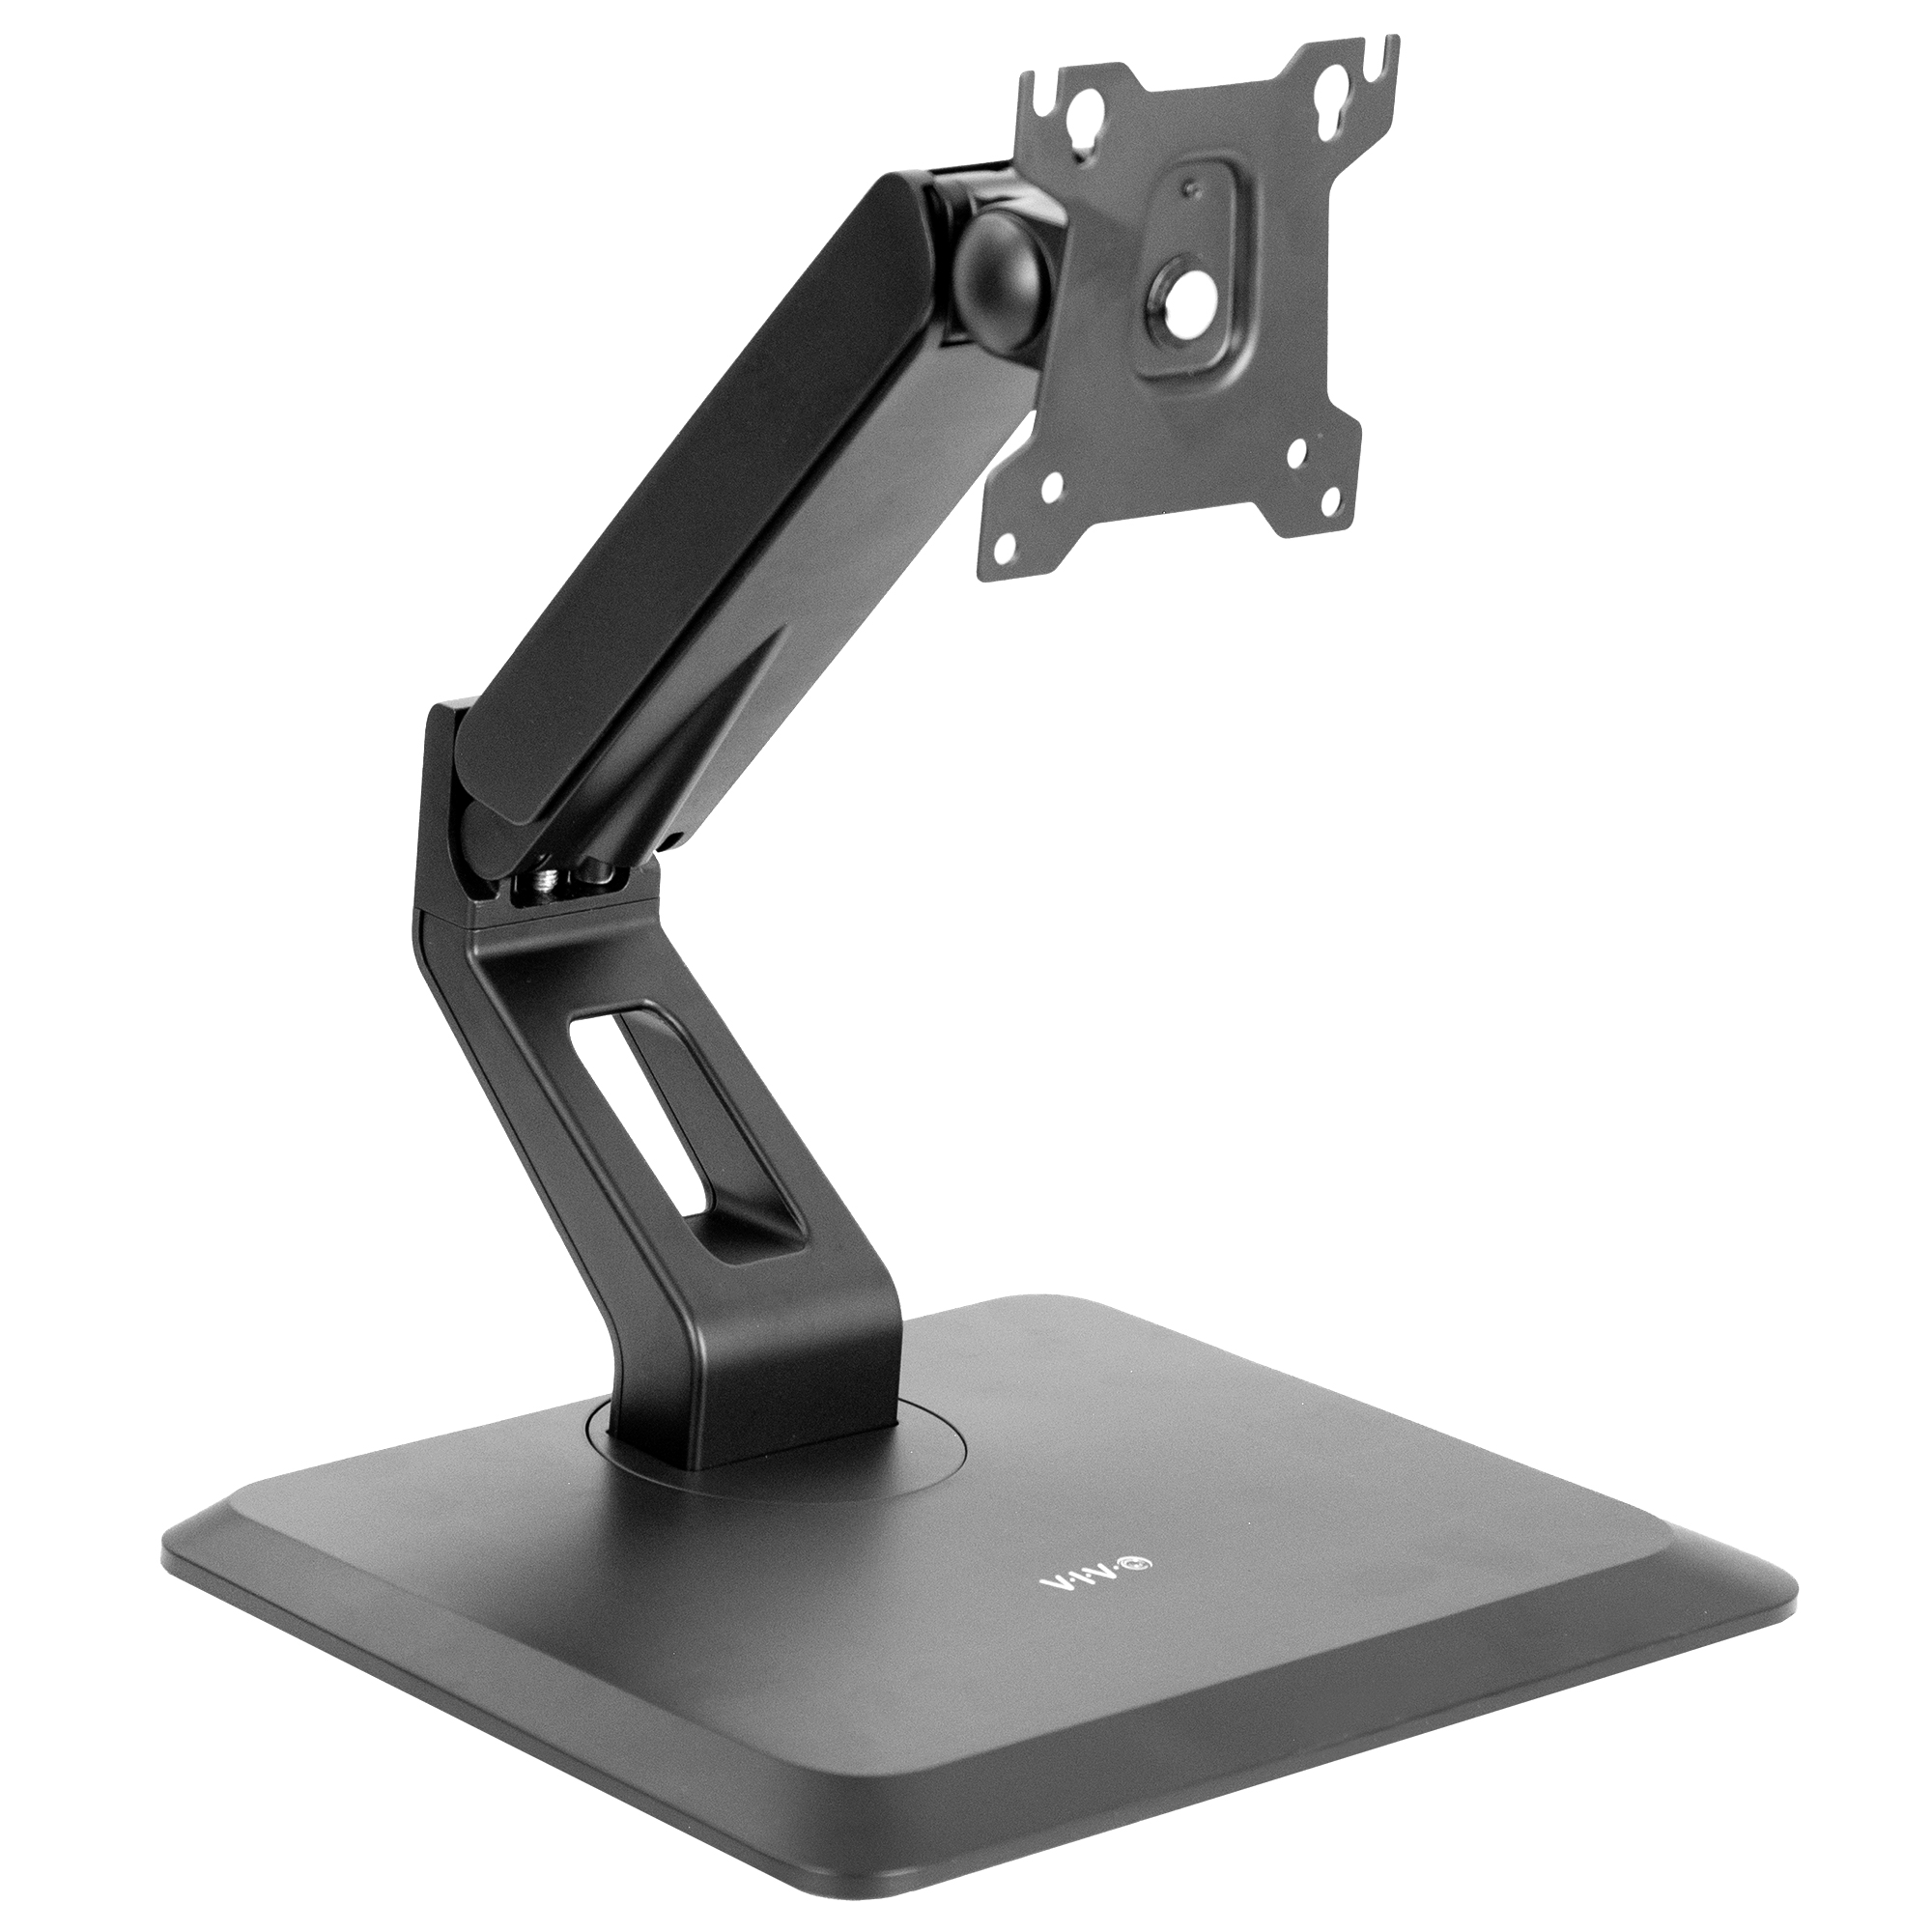 VIVO Freestanding Monitor Arm Mount for 17" to 32" Touch Screens | eBay